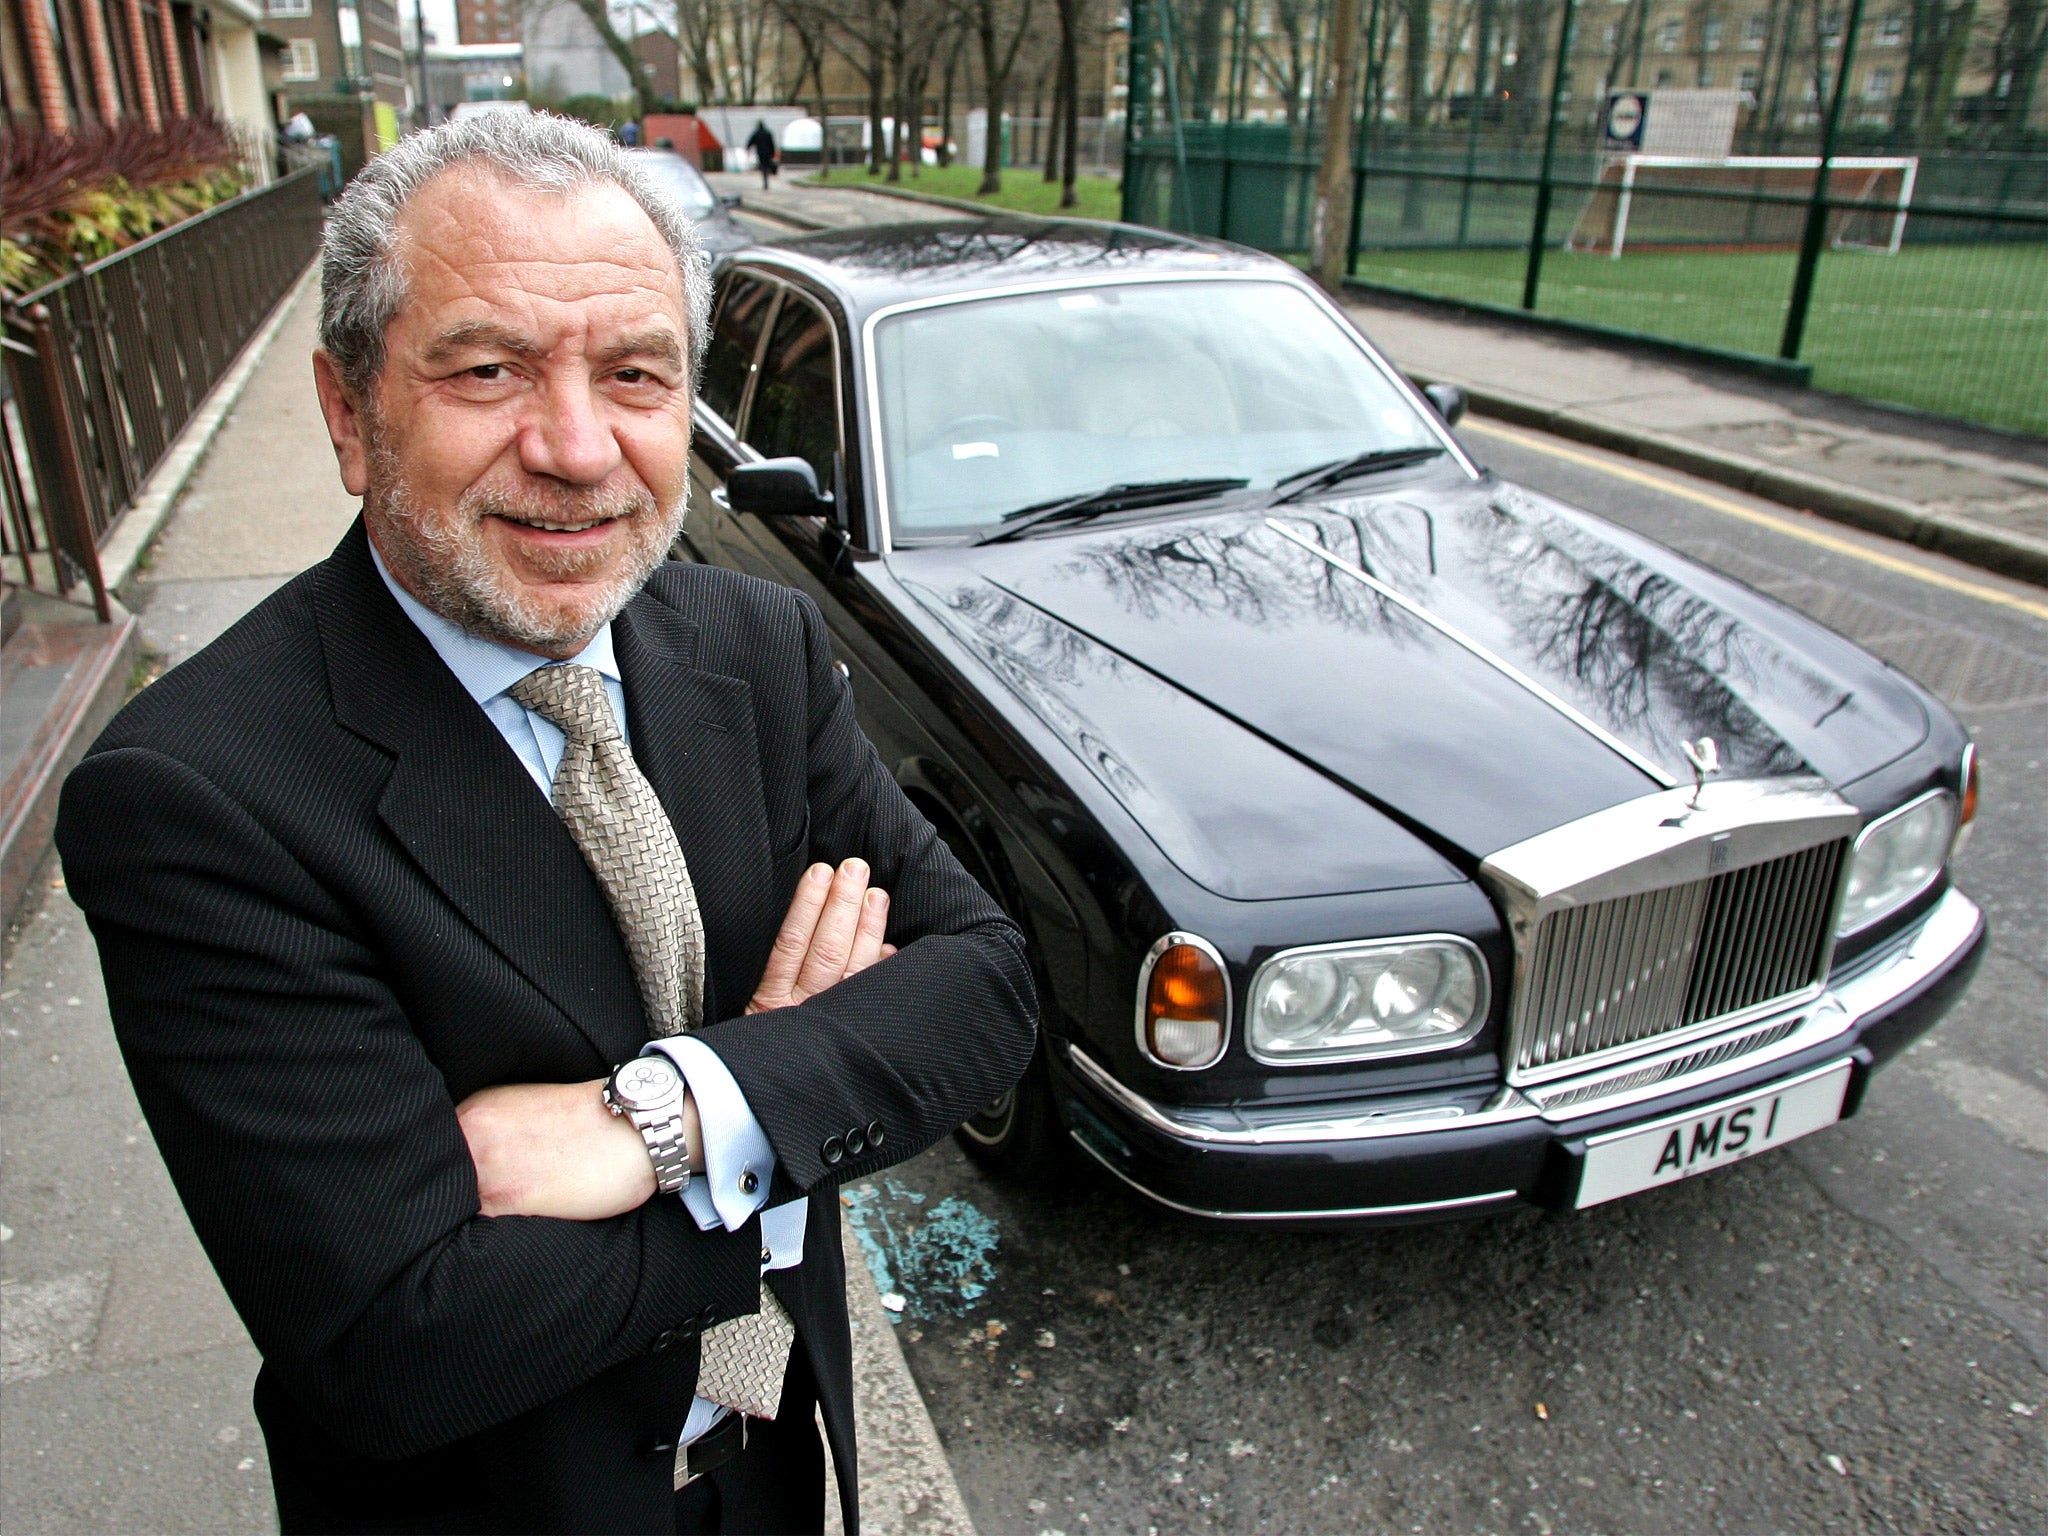 Sir Alan has swapped his old Rolls-Royce Phantom (pictured) for a cheaper model